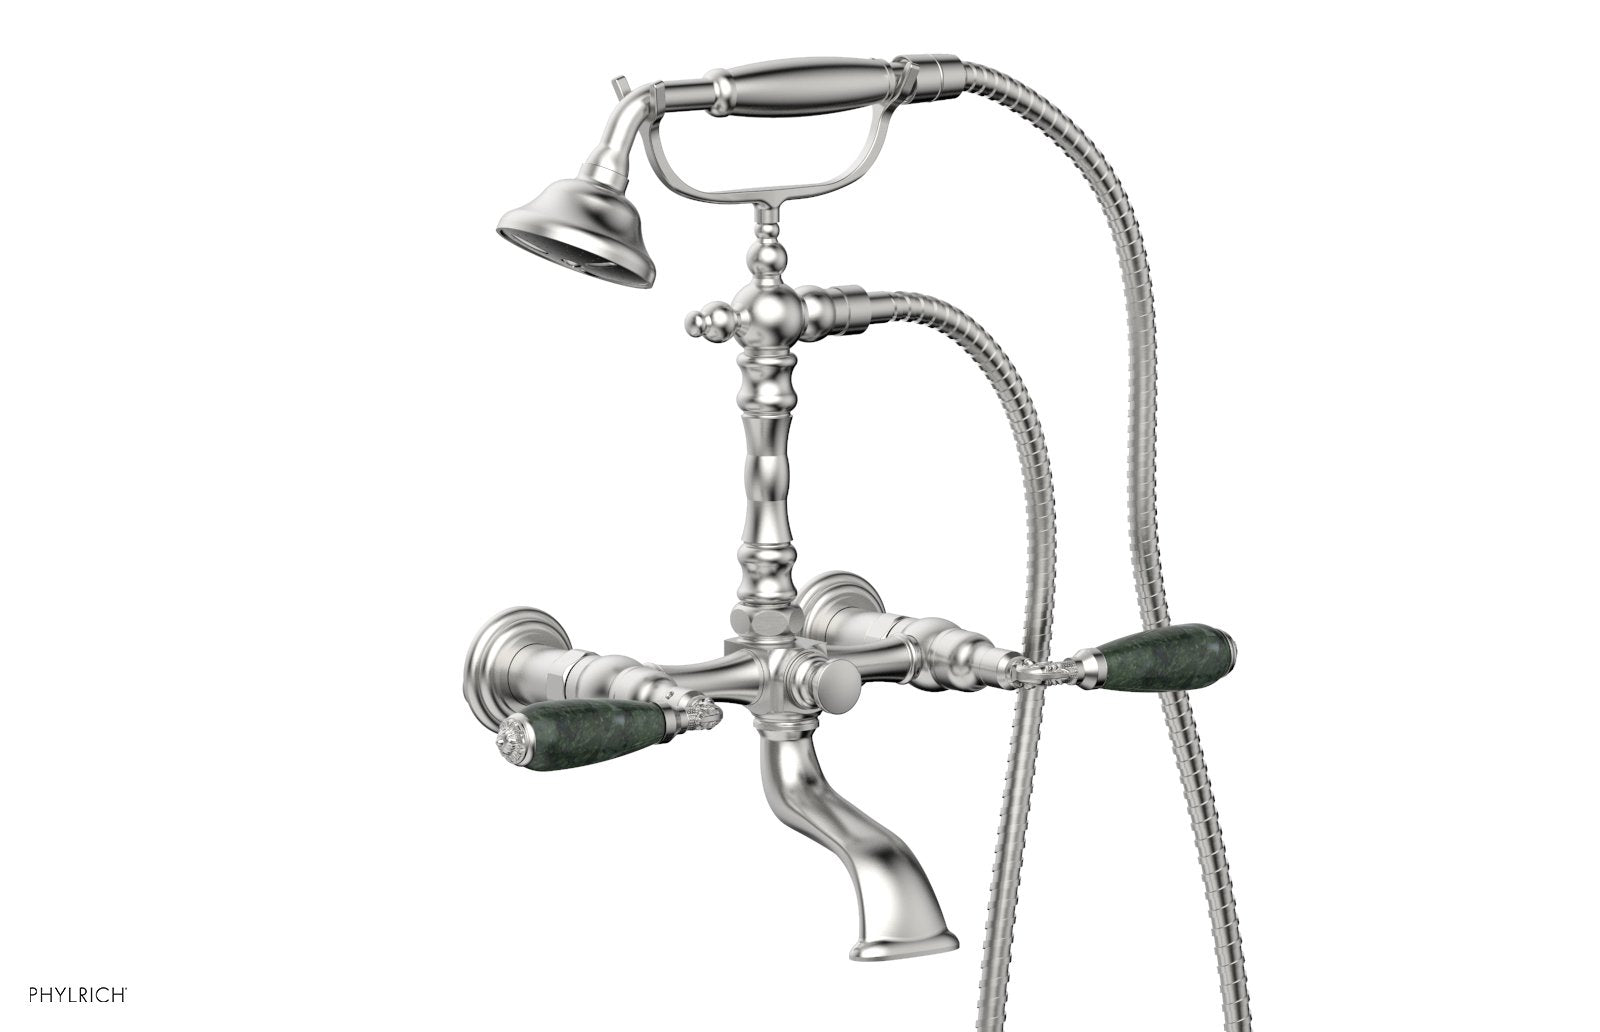 Phylrich VALENCIA Exposed Tub & Hand Shower - Green Marble Lever Handle